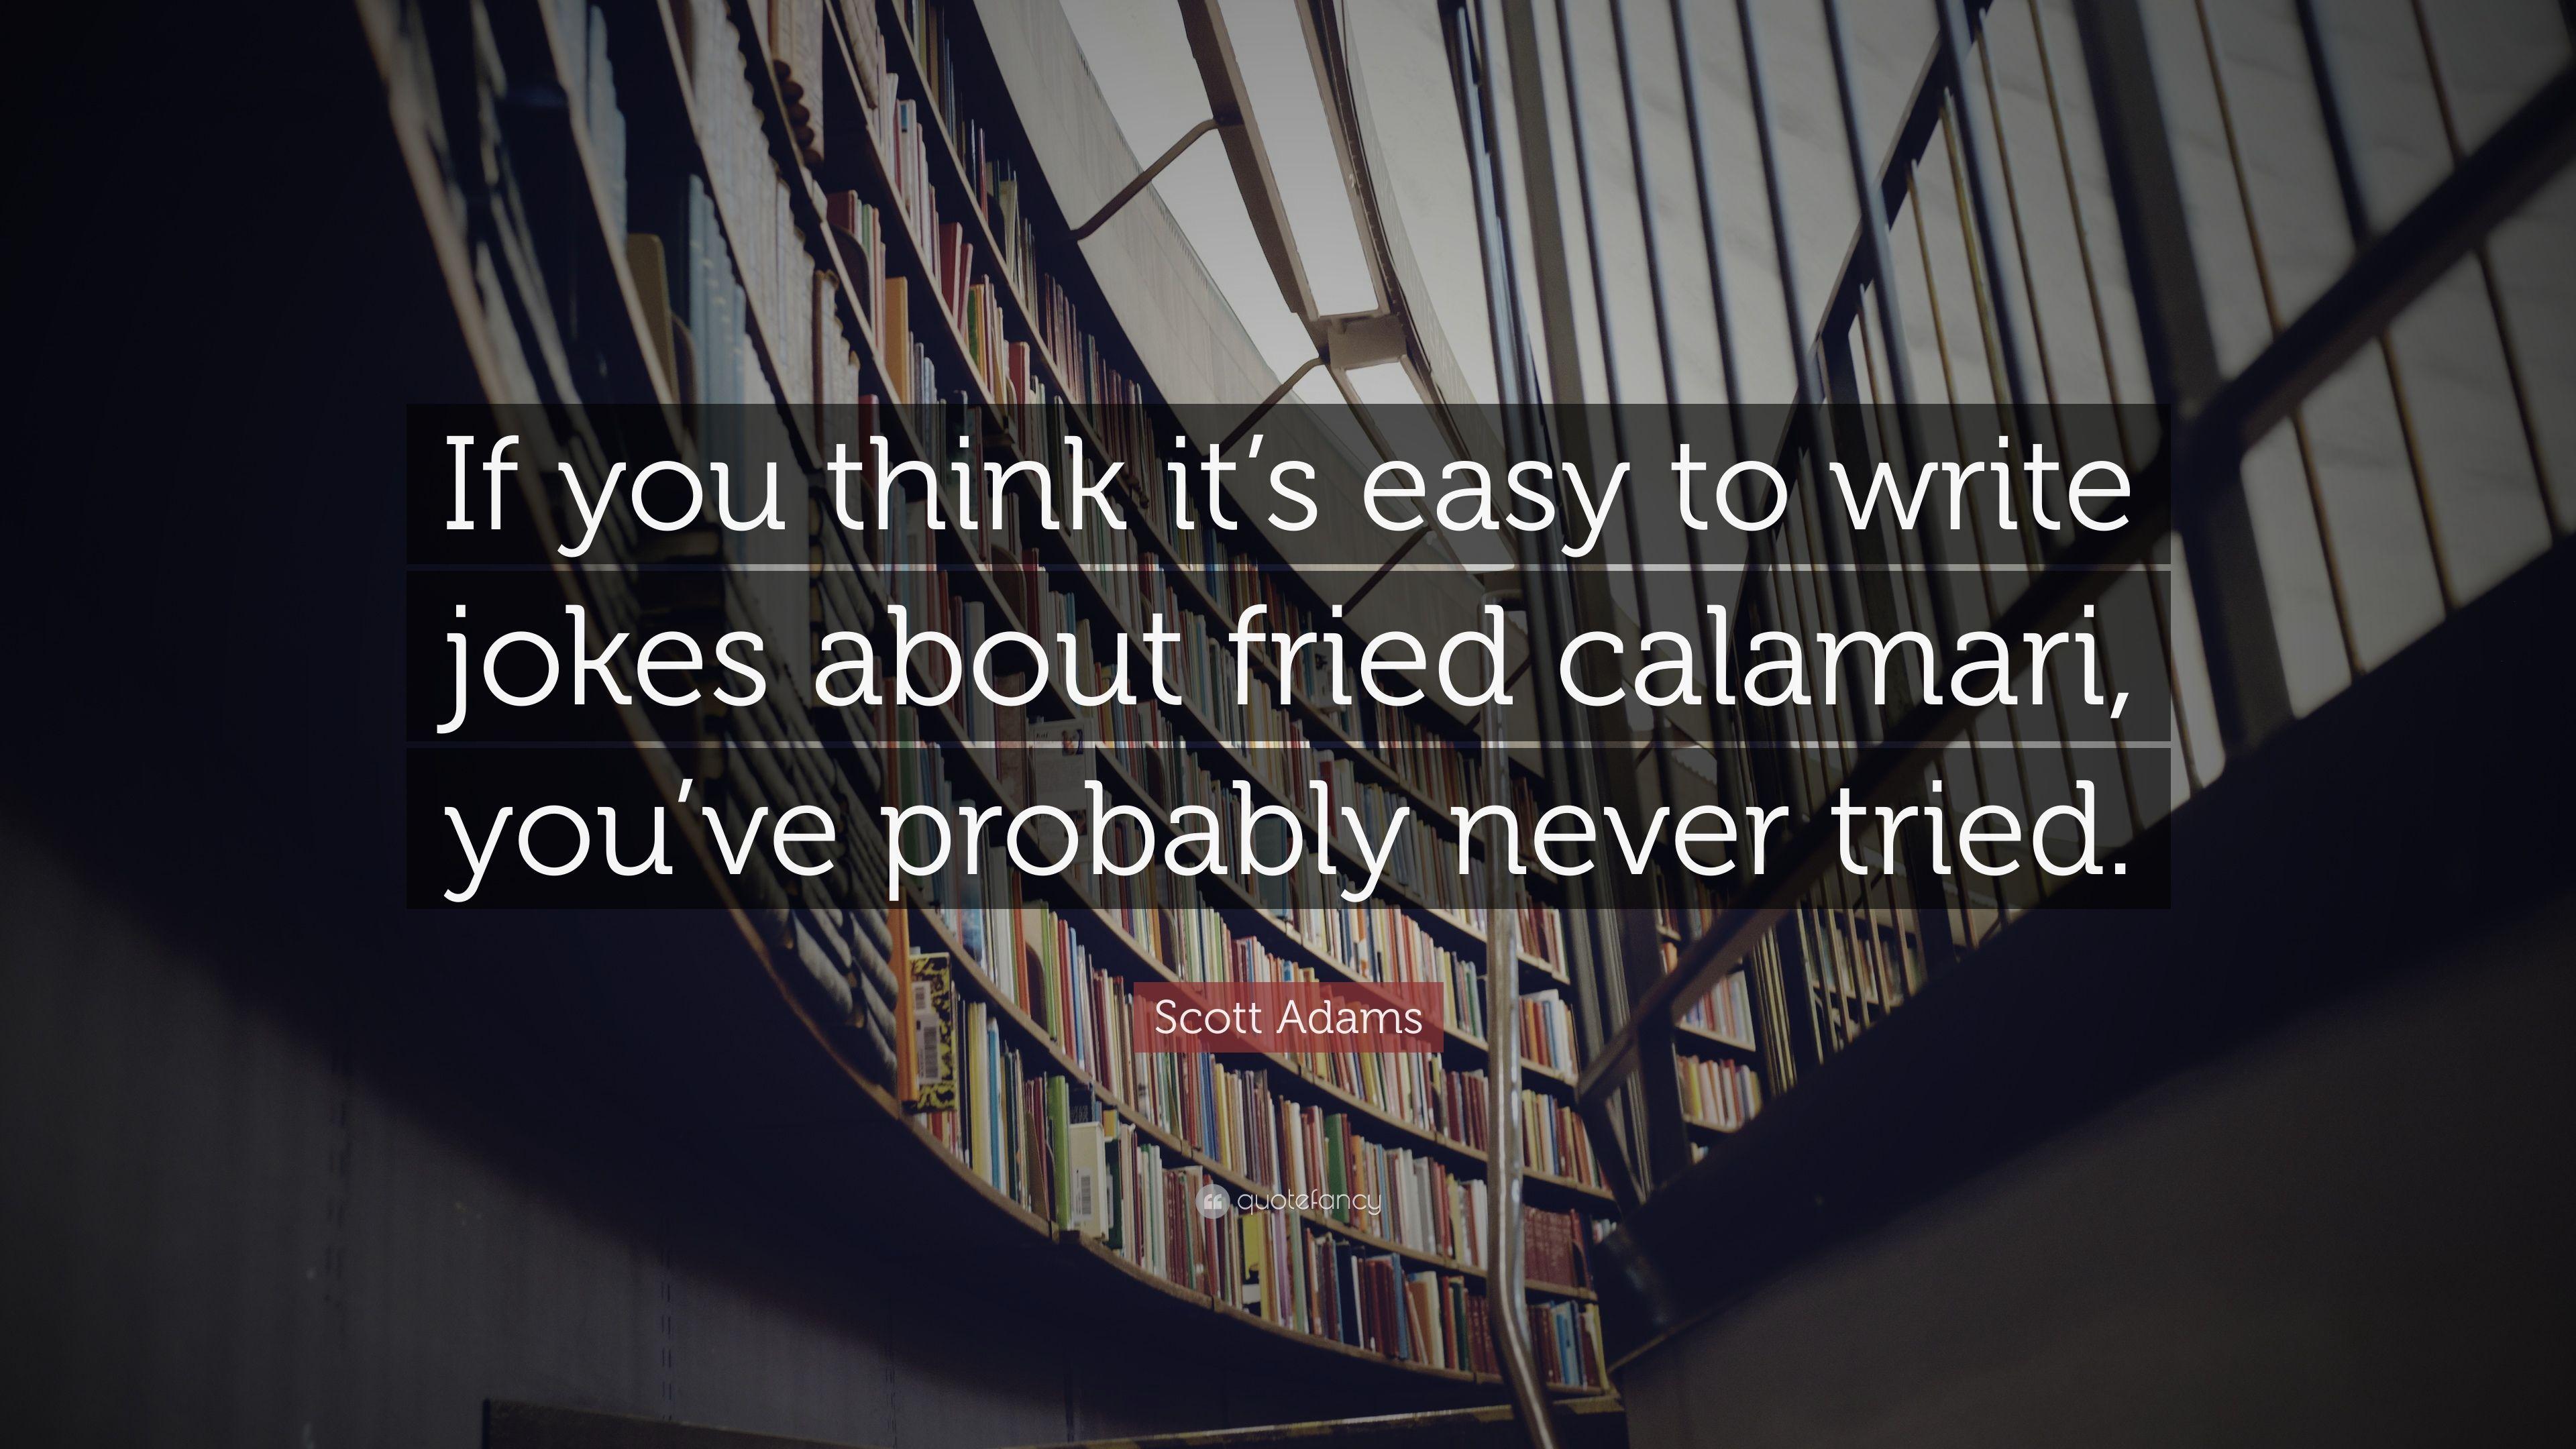 Scott Adams Quote: "If you think it's easy to write jokes about.